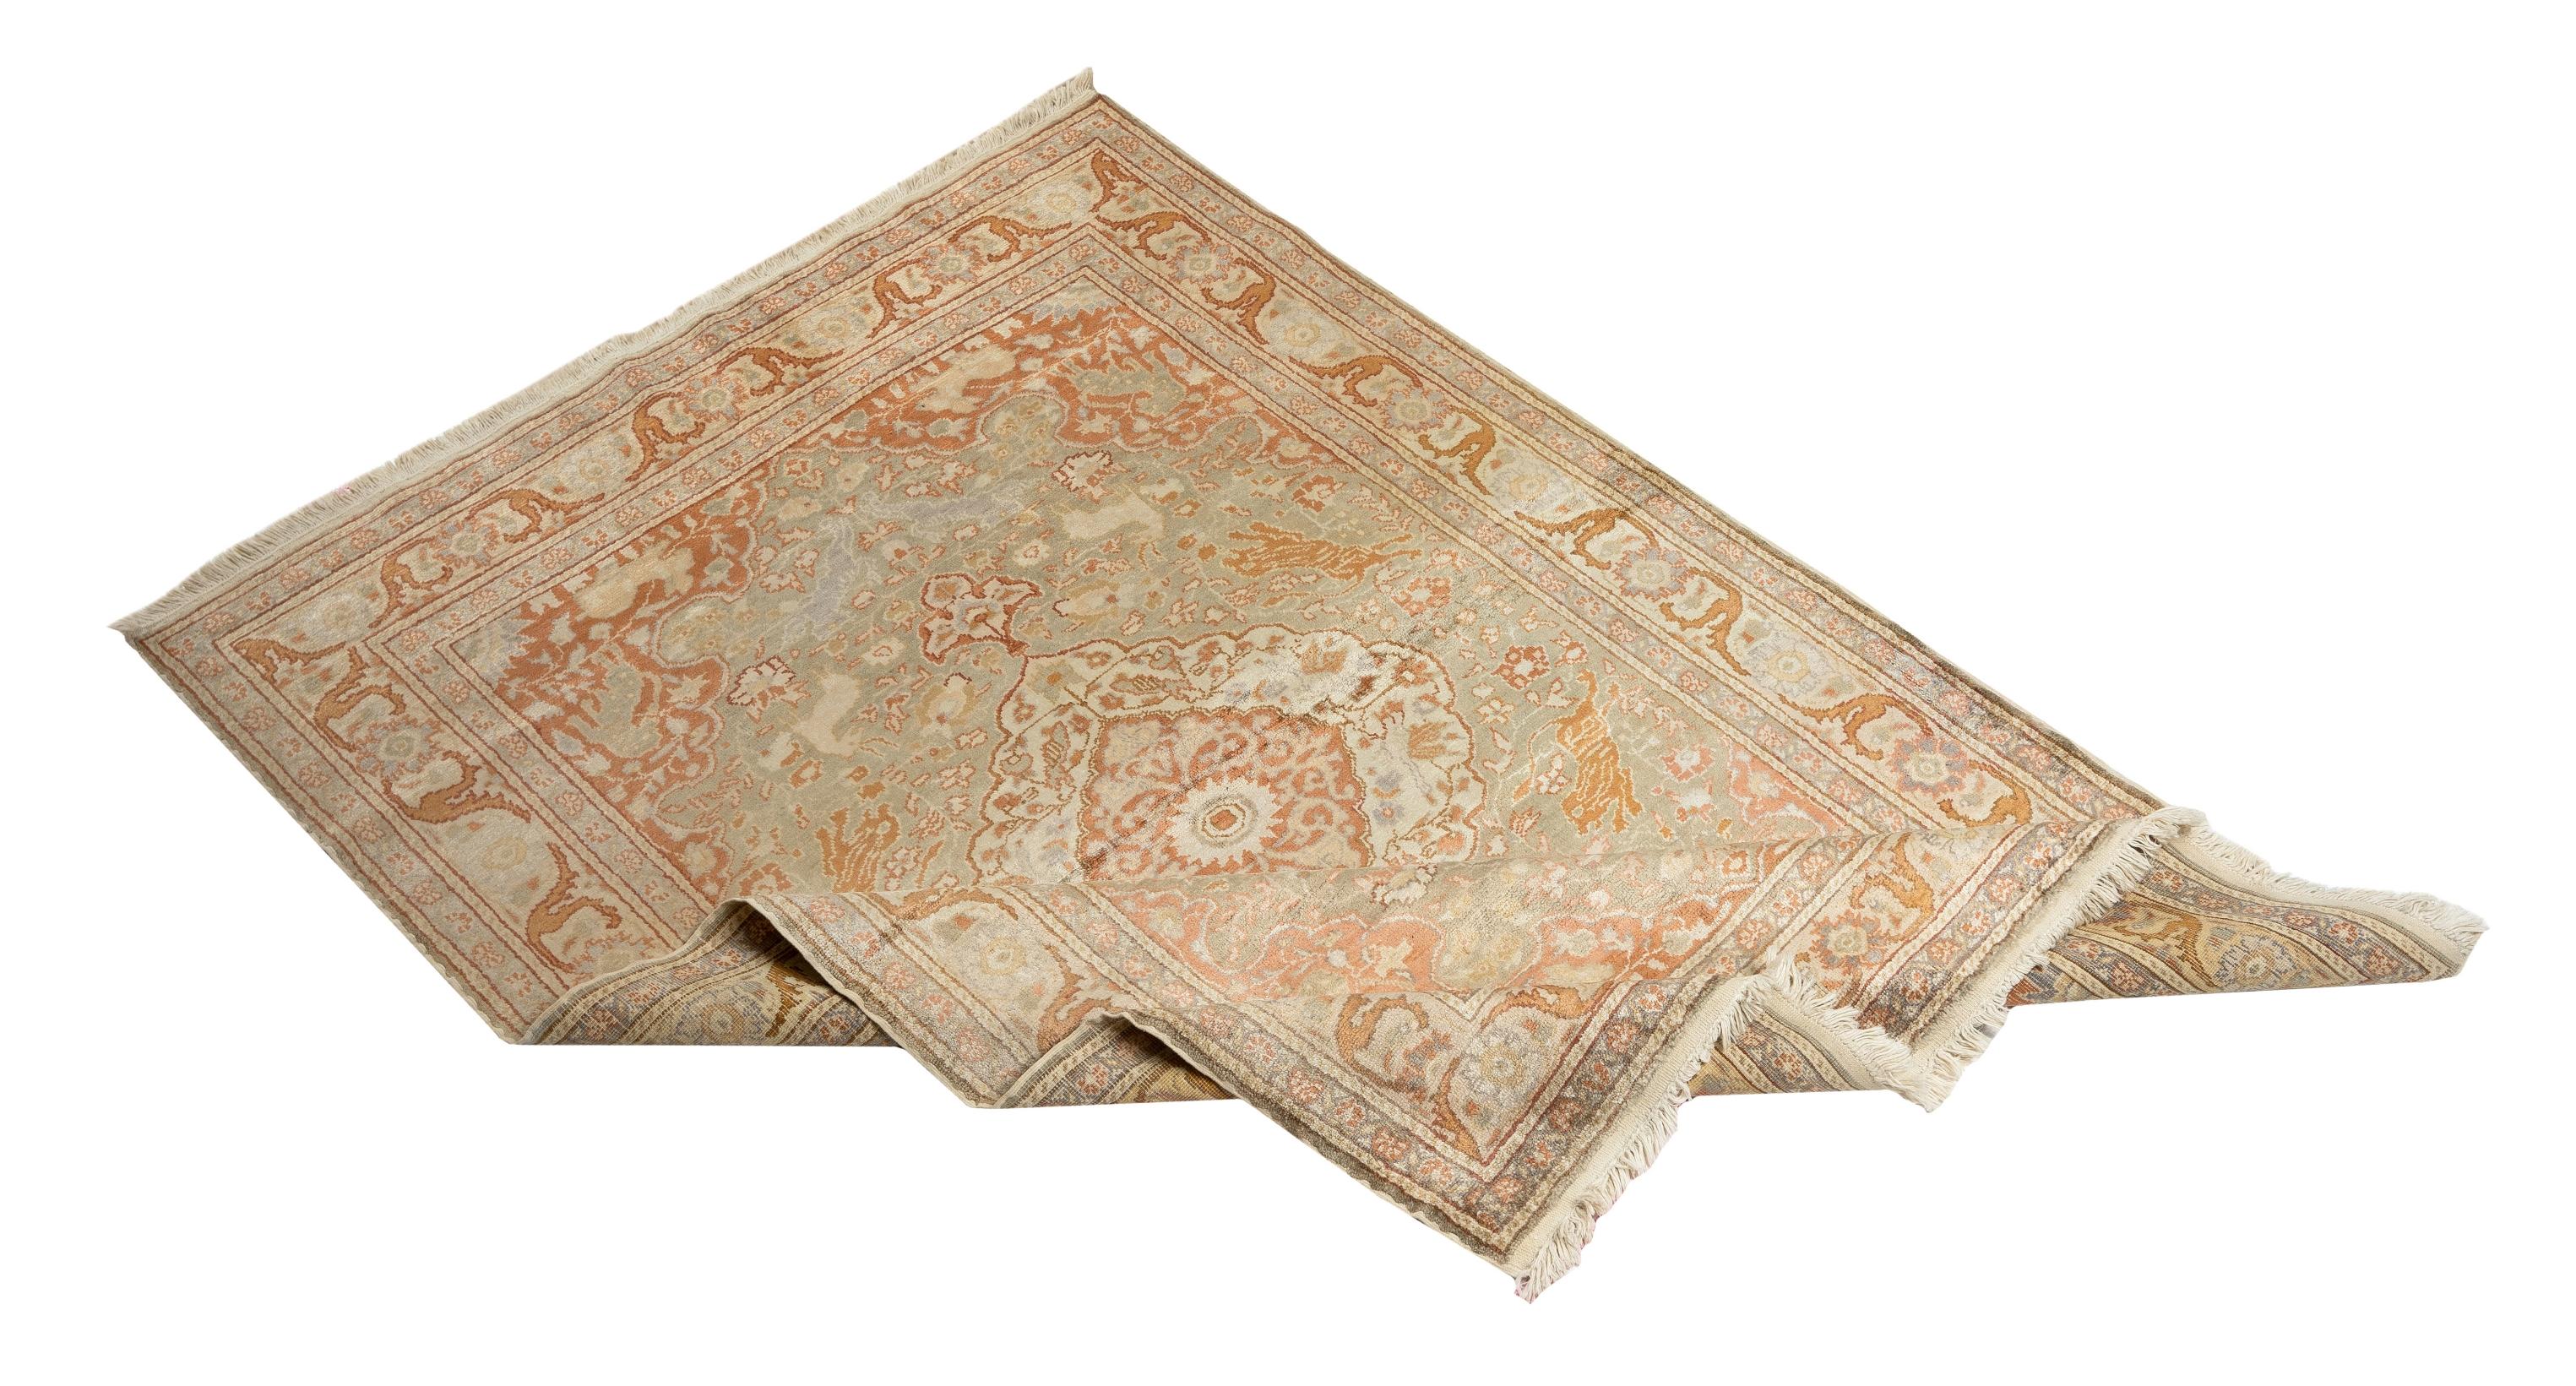 An elegant, very finely-woven Central Anatolian rug from the town of Kayseri made of art-silk that catches and reflects light with its beautiful, glowing, organic cotton-based material in a soft and soothing color palette of light tawny brown, sage